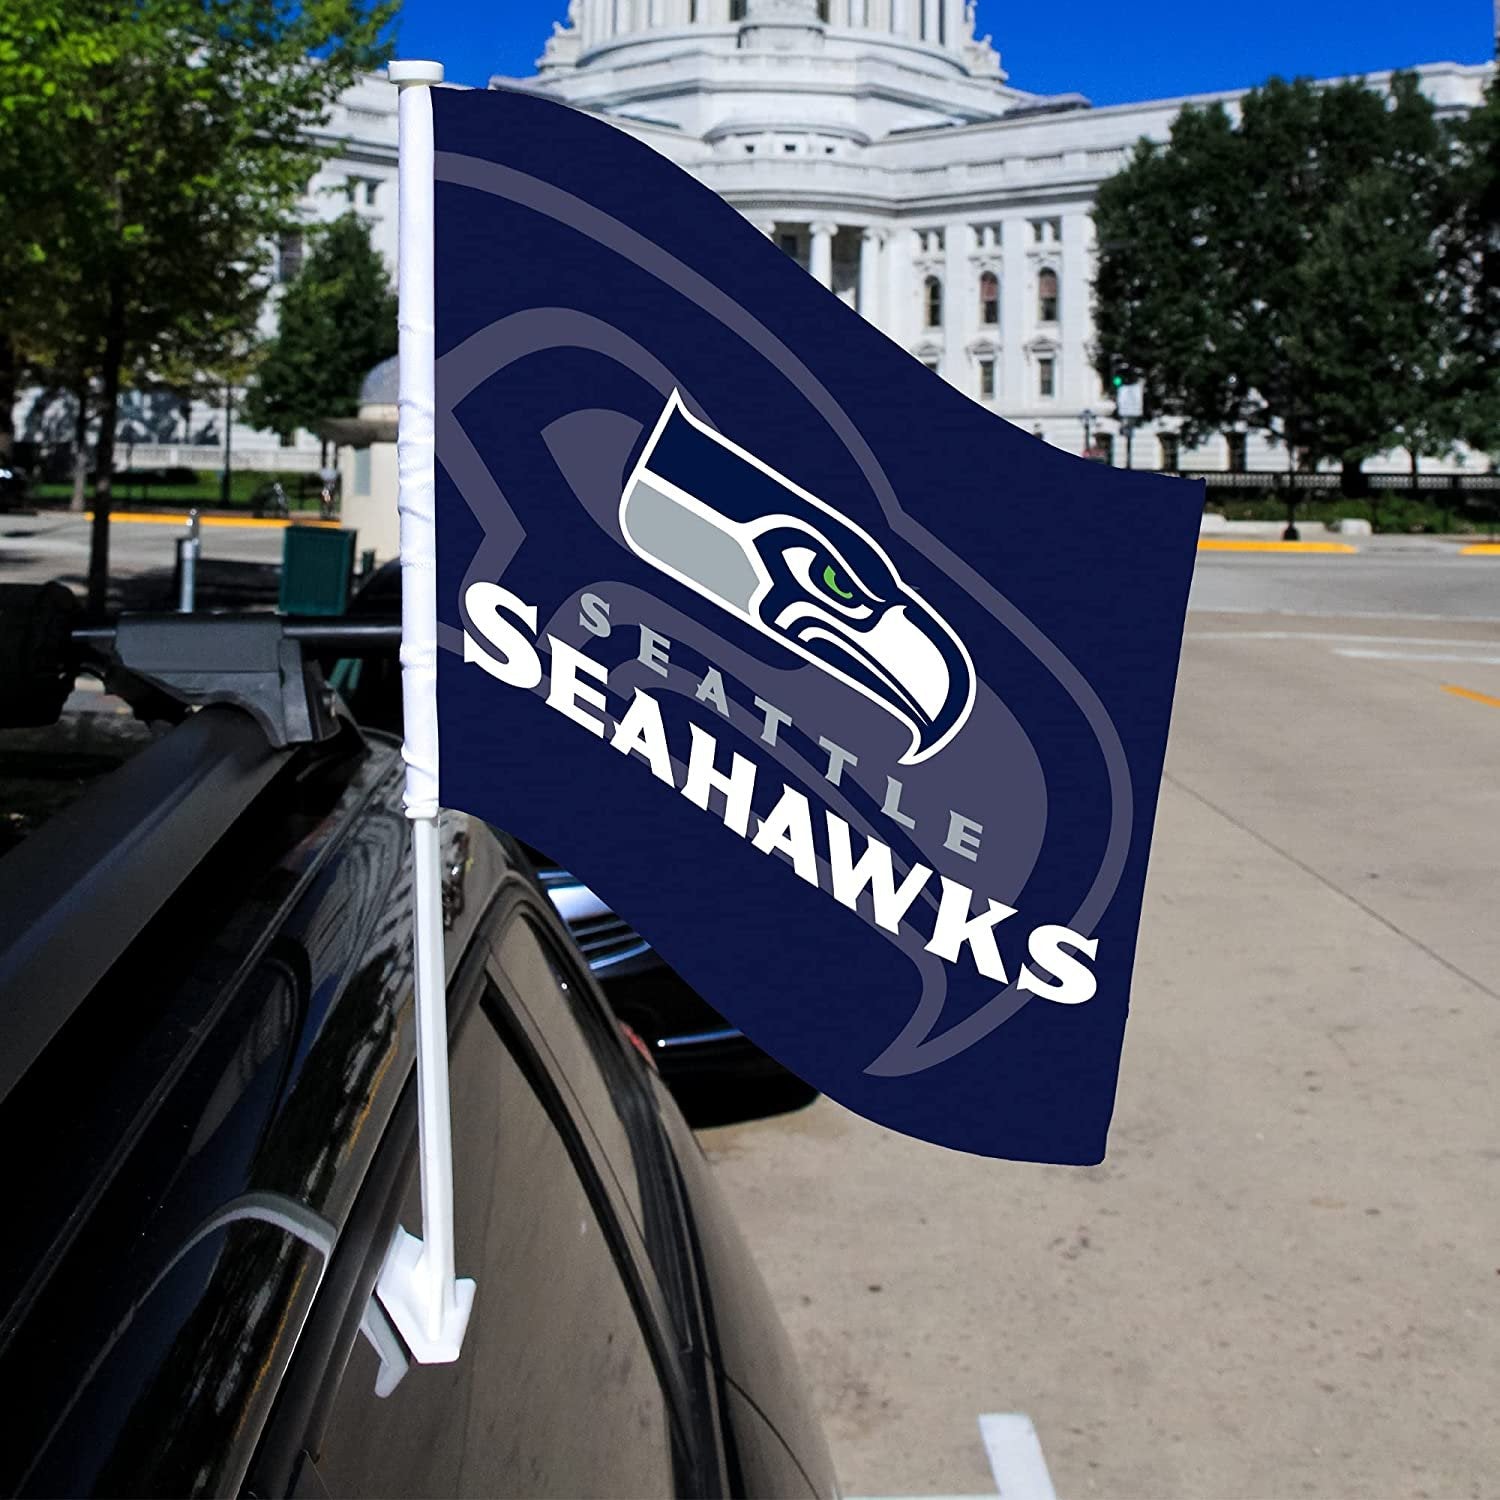 Seattle Seahawks Car Flag with Display Pole Secondary Logo Design